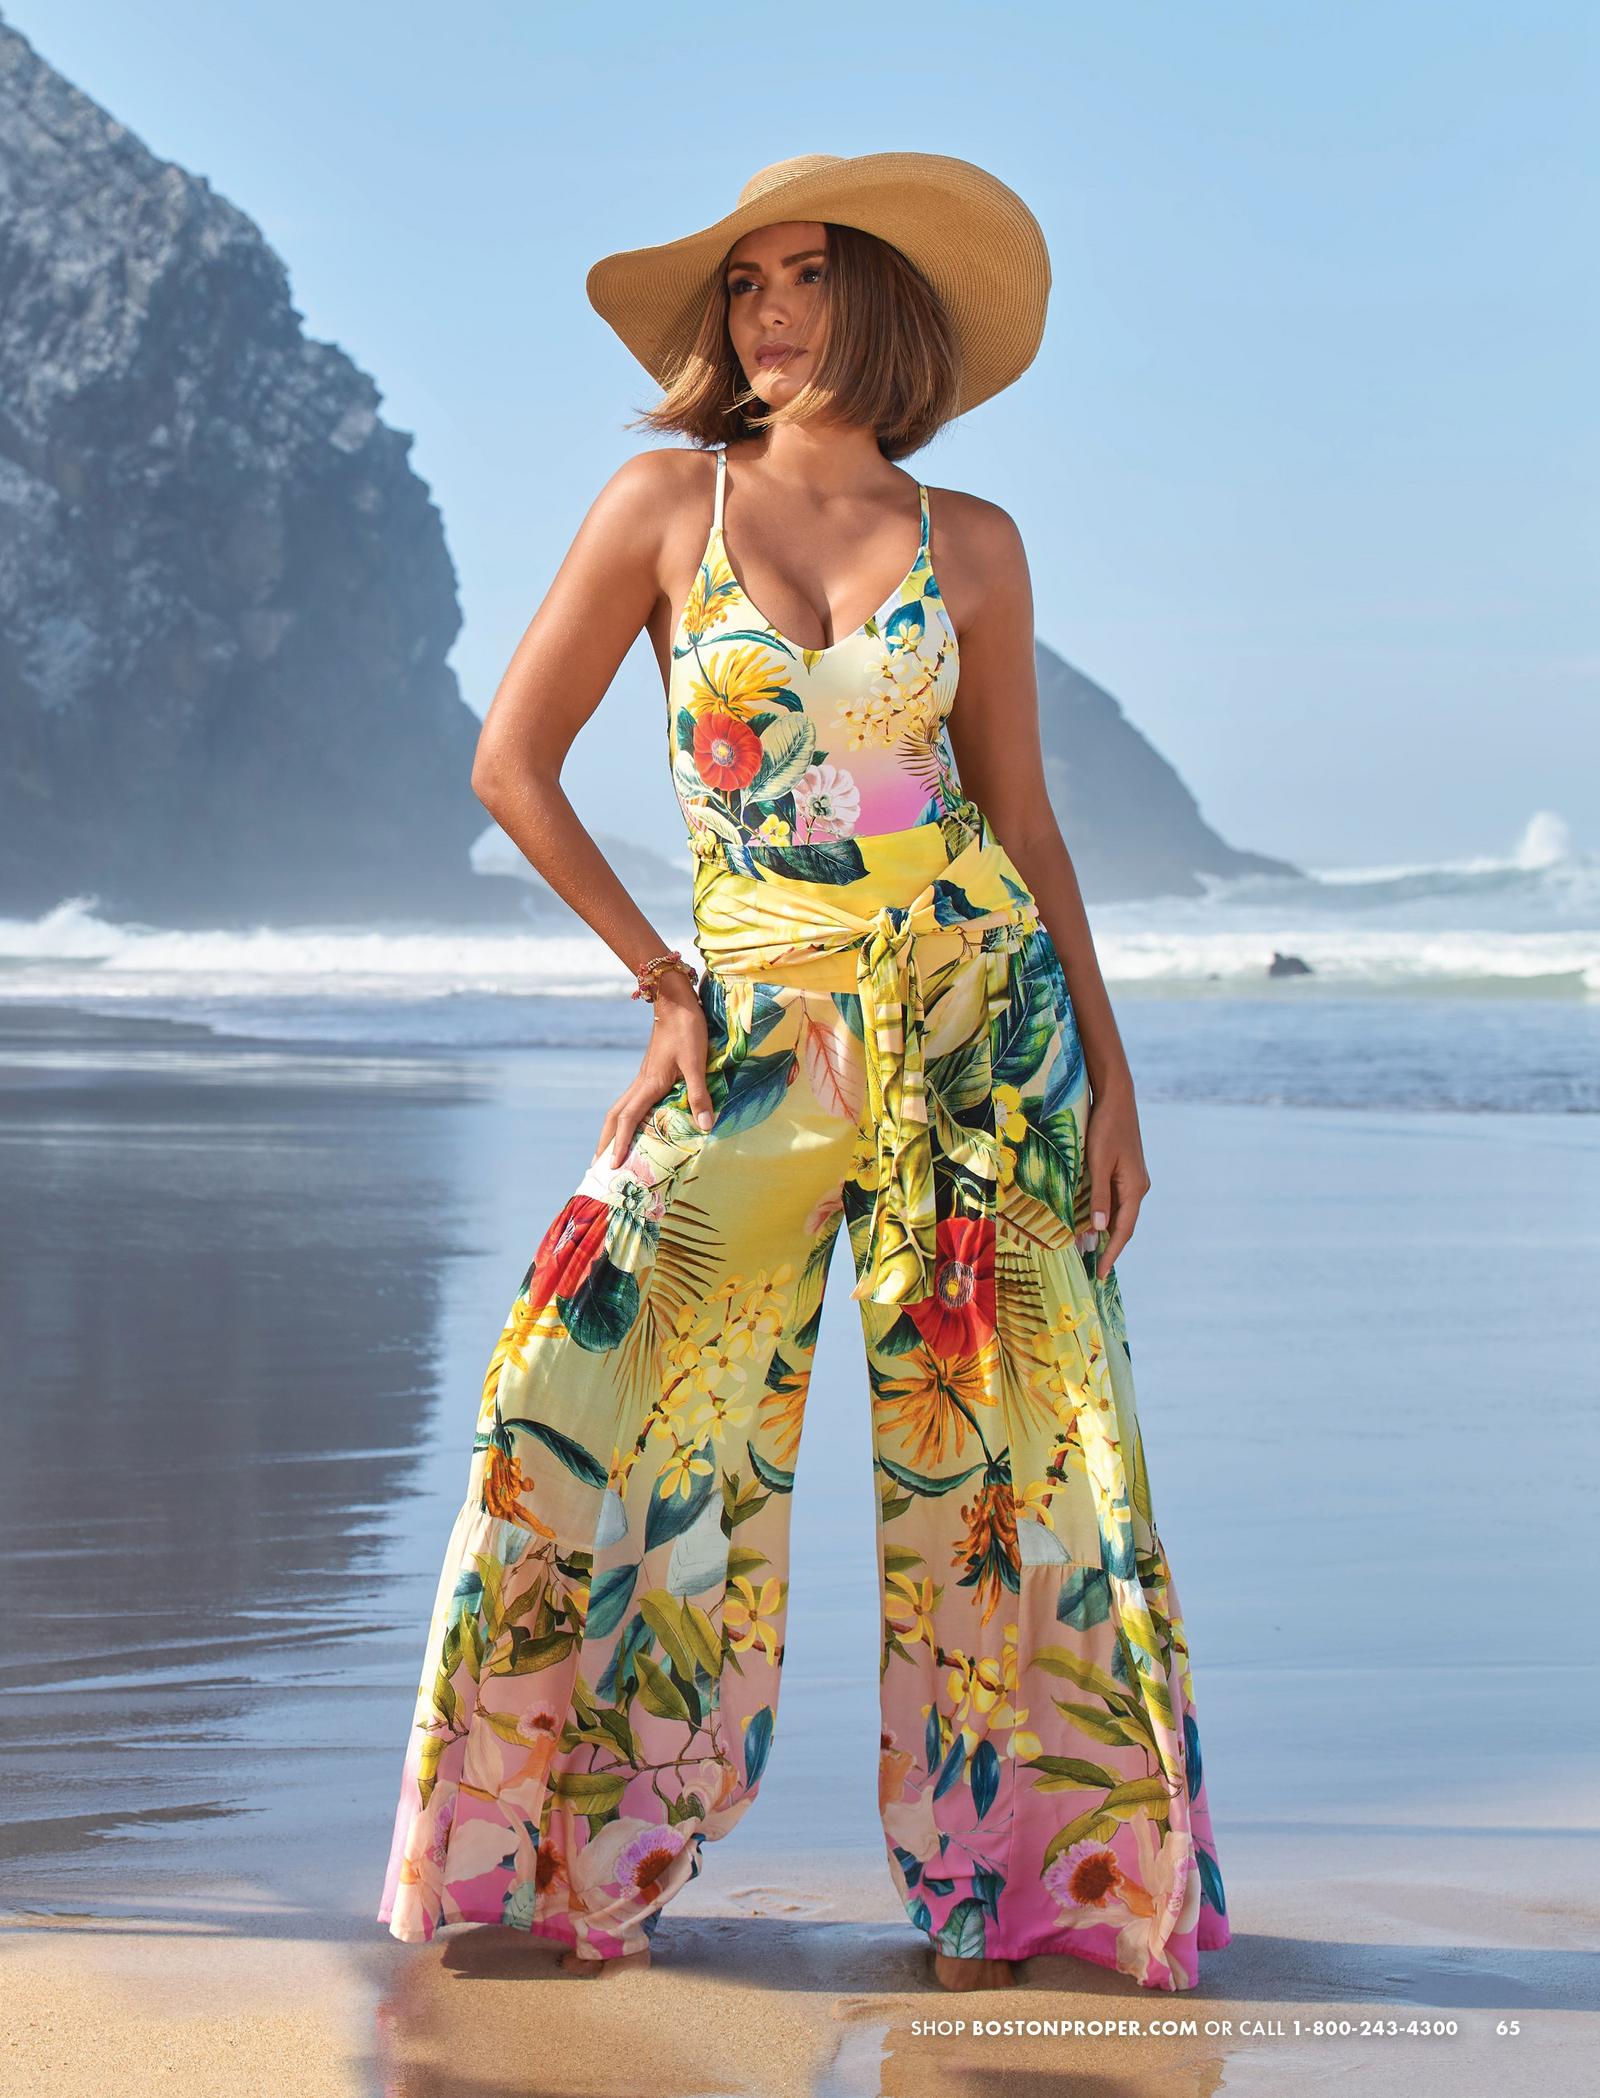 model wearing a floral printed v-neck one-piece swimsuit, matching palazzo cover-up pants, and a straw wide brim hat.